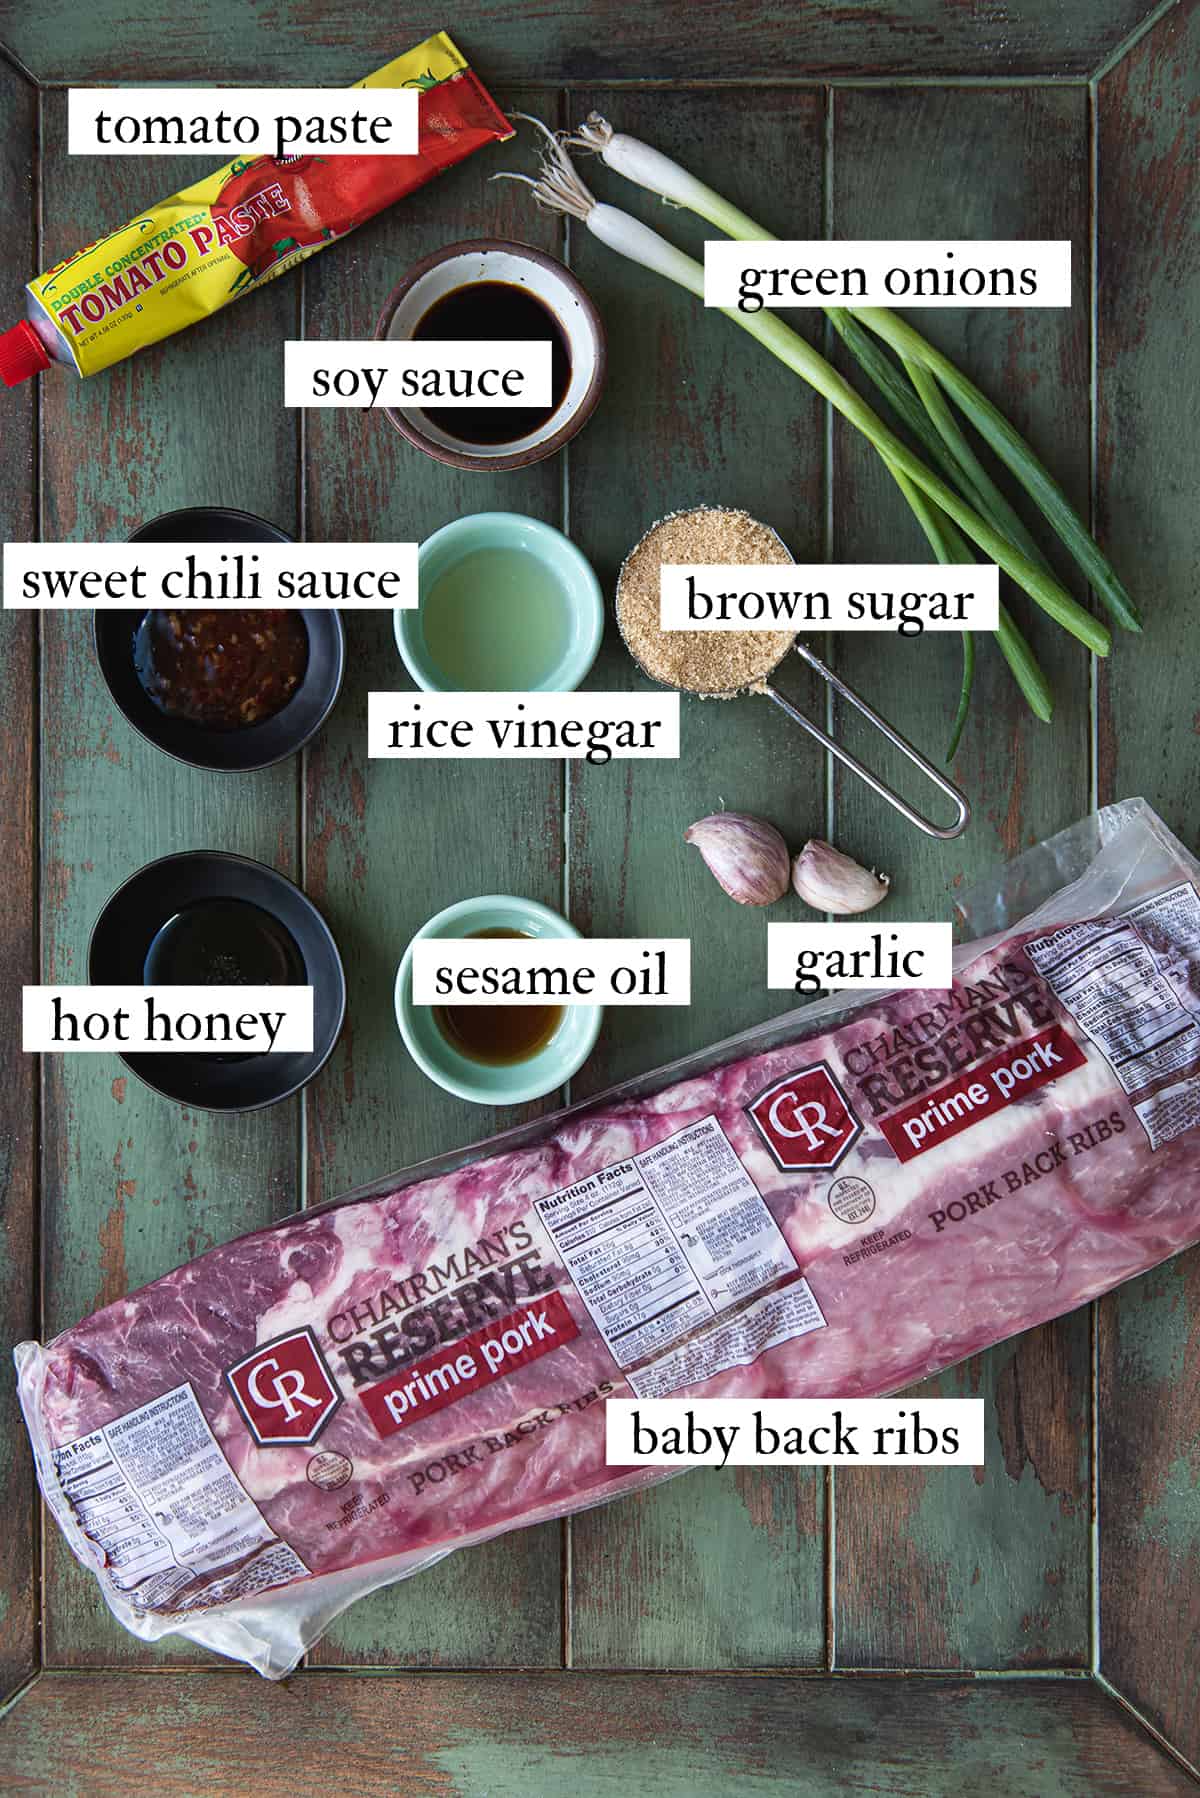 ingredients for baby back ribs